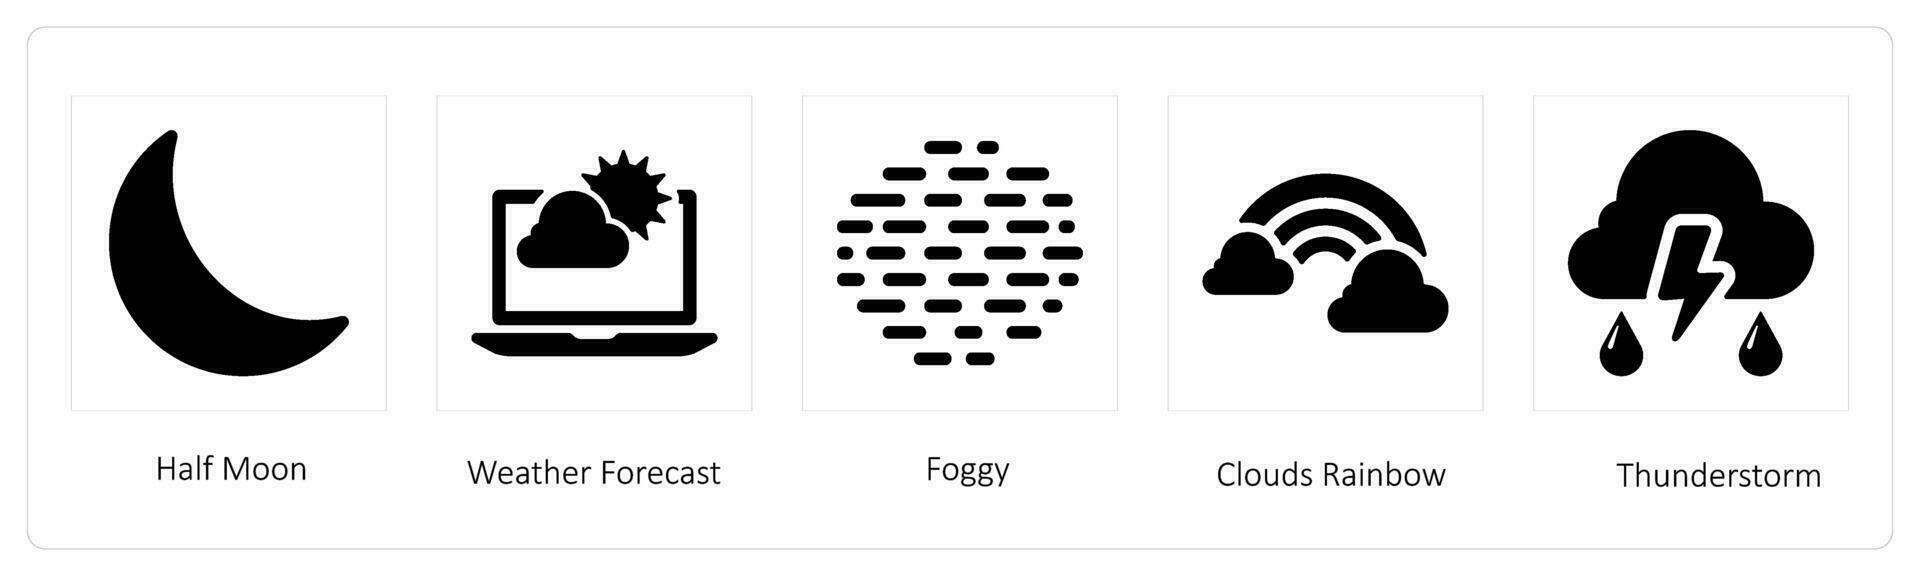 half moon, weather forecast and foggy vector